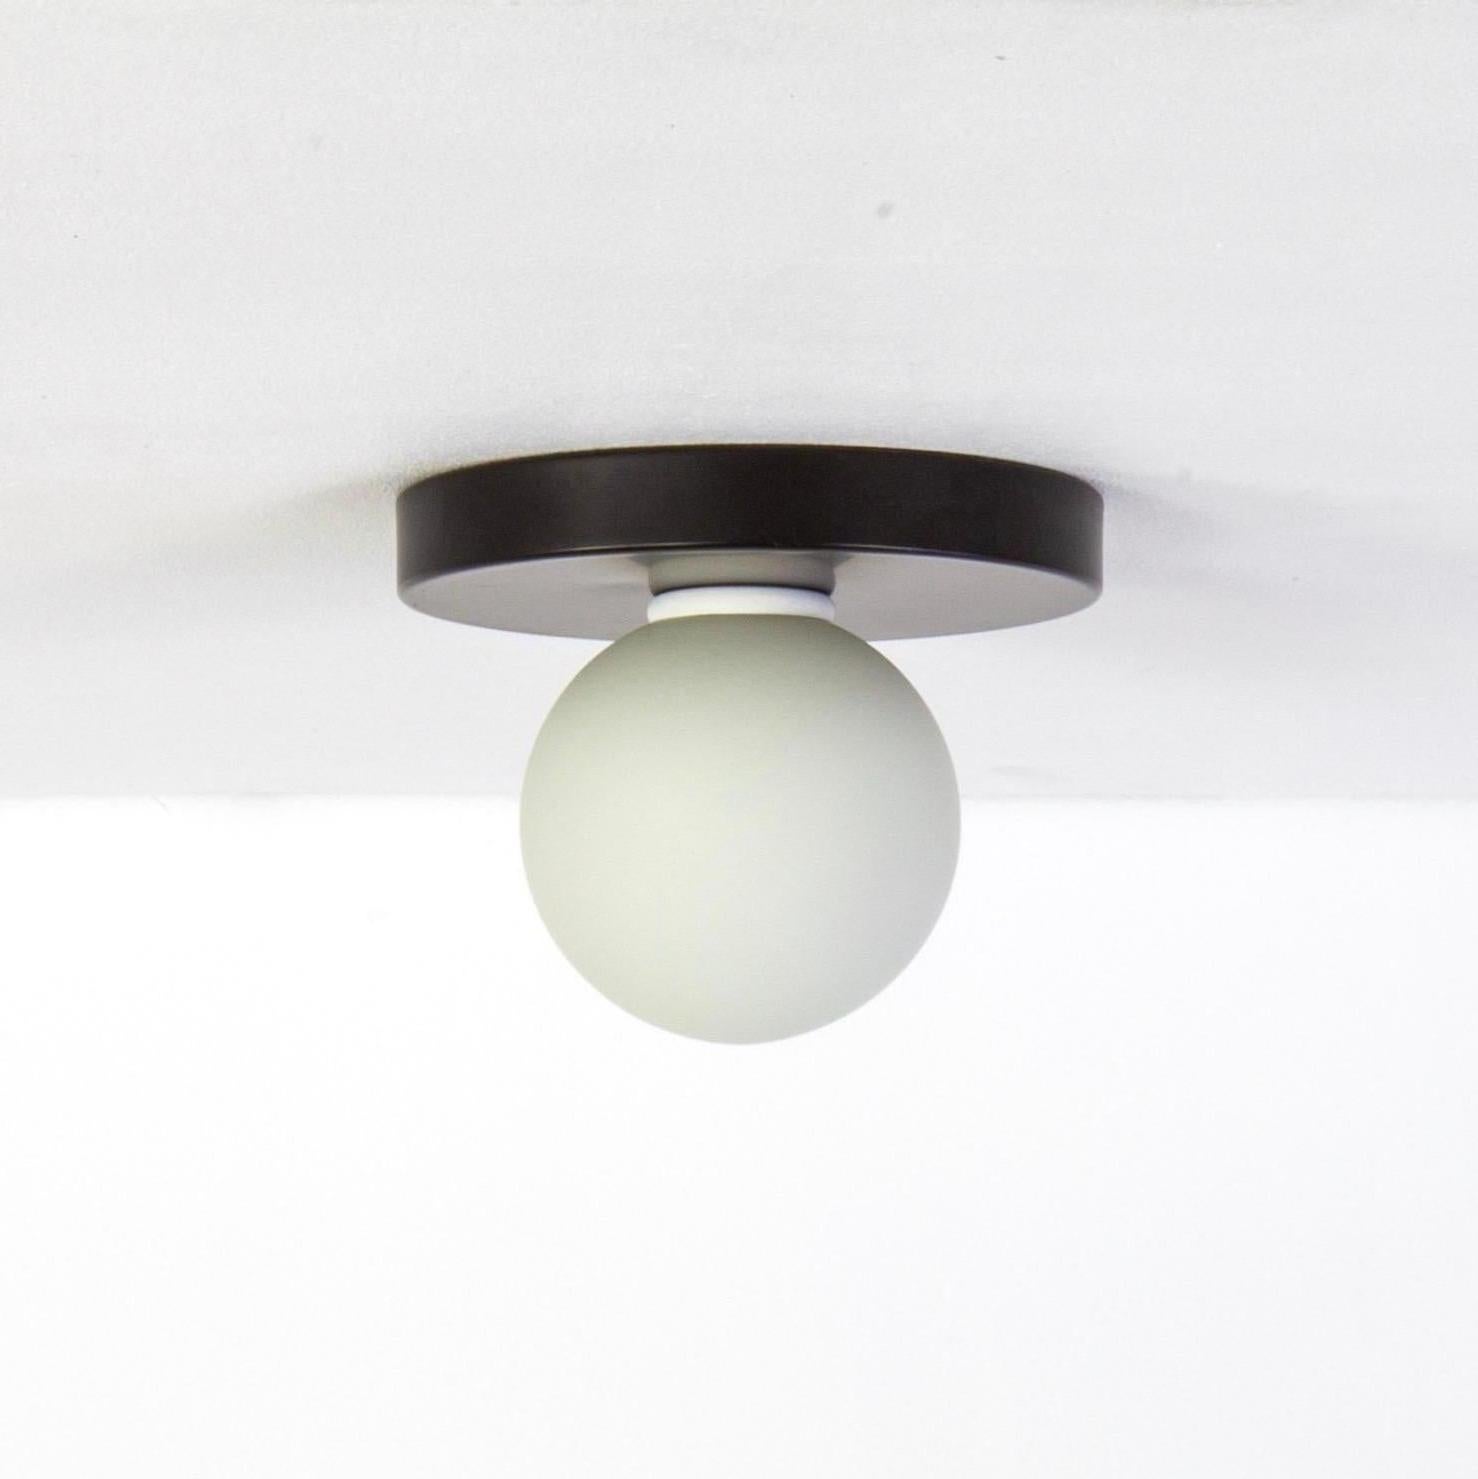 This listing is for 2x Globe Flush Mounts in black designed and manufactured by Research.Lighting.

Materials: Brass, Steel & Glass
Finish: Black
Electronics: 1x G9 Socket, 1x 4.5 Watt LED Bulb (included), 450 Lumens
ADA Compliant. UL Listed. Made